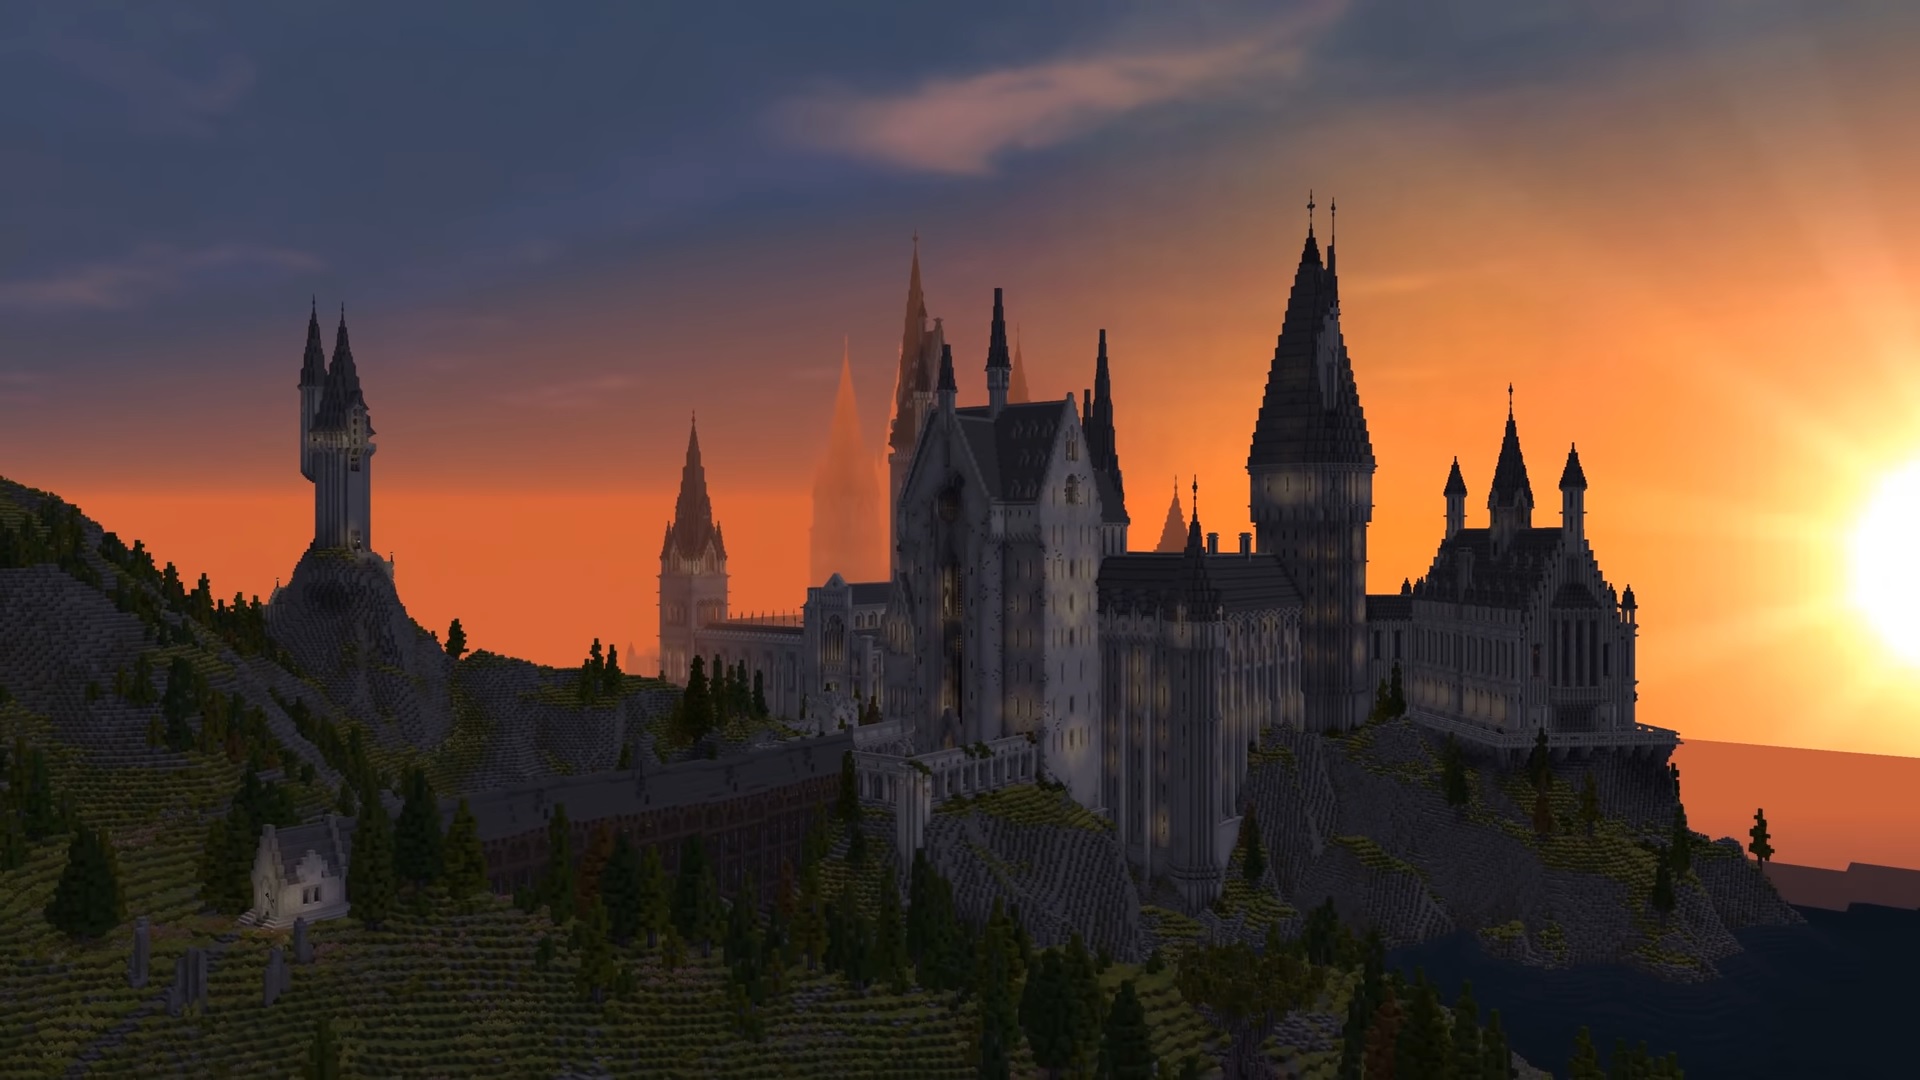 Immense Harry Potter Minecraft mod has been released